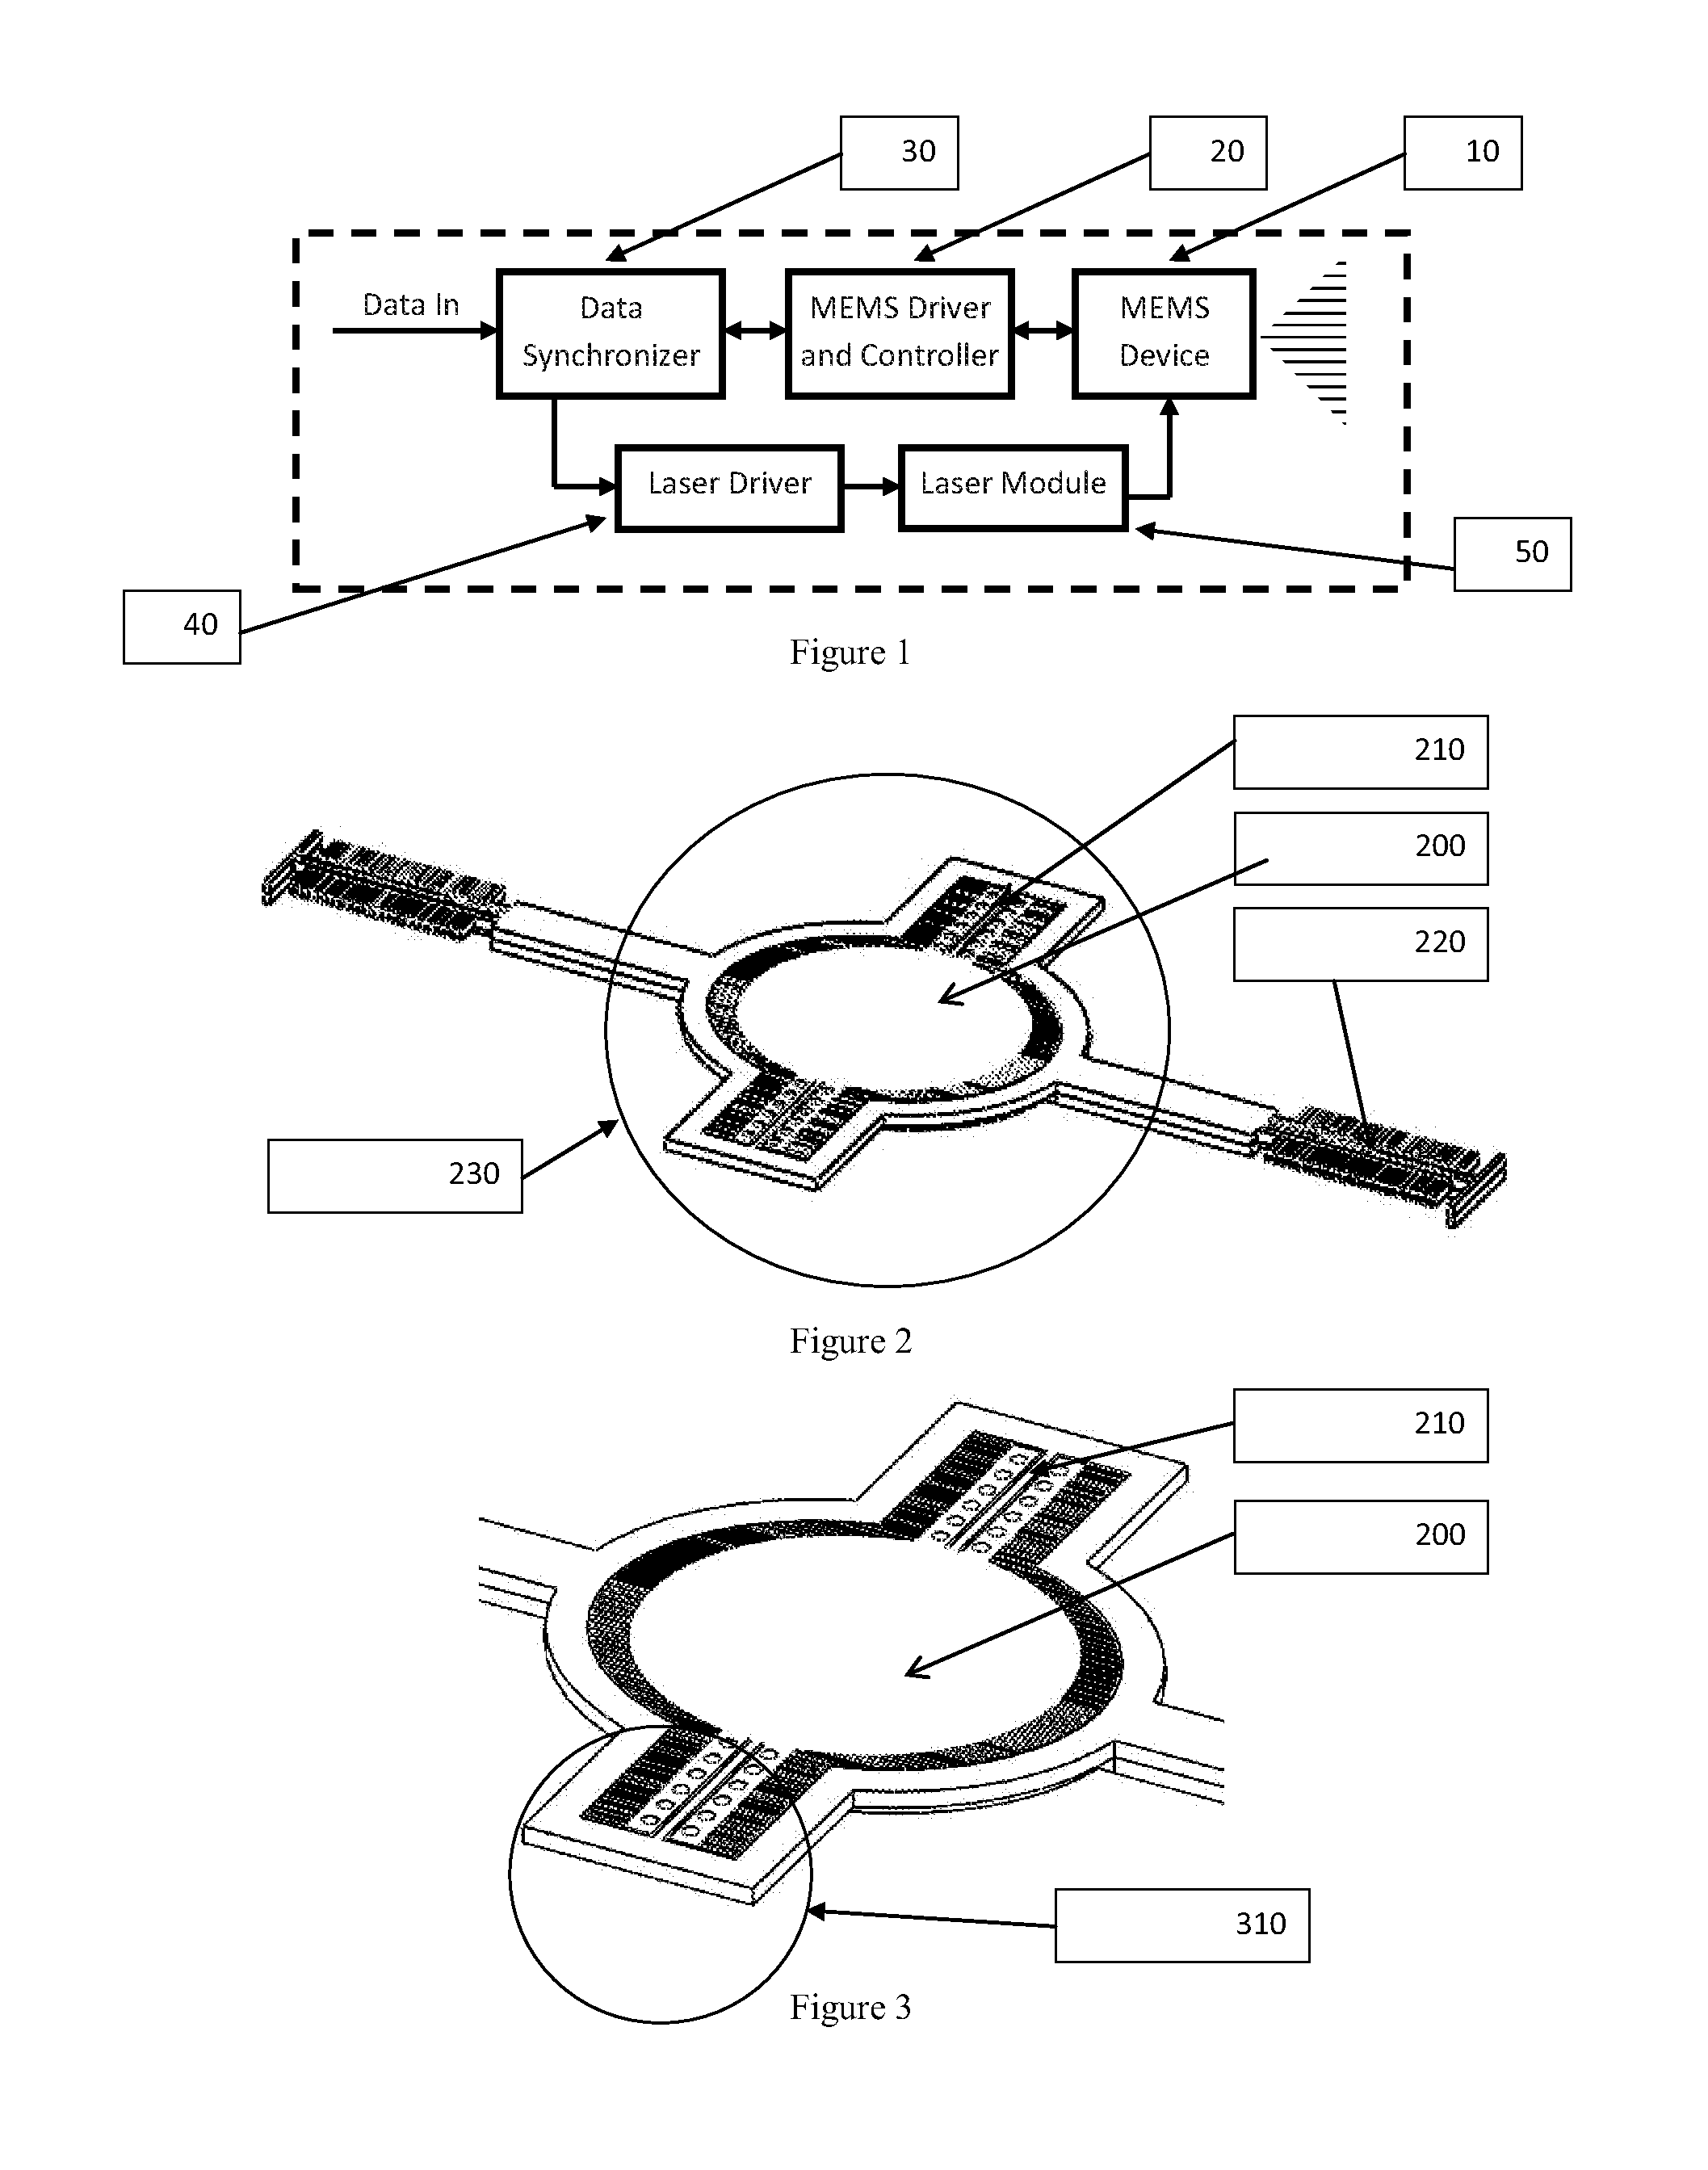 Apparatus and methods for locking resonating frequency of a miniature system